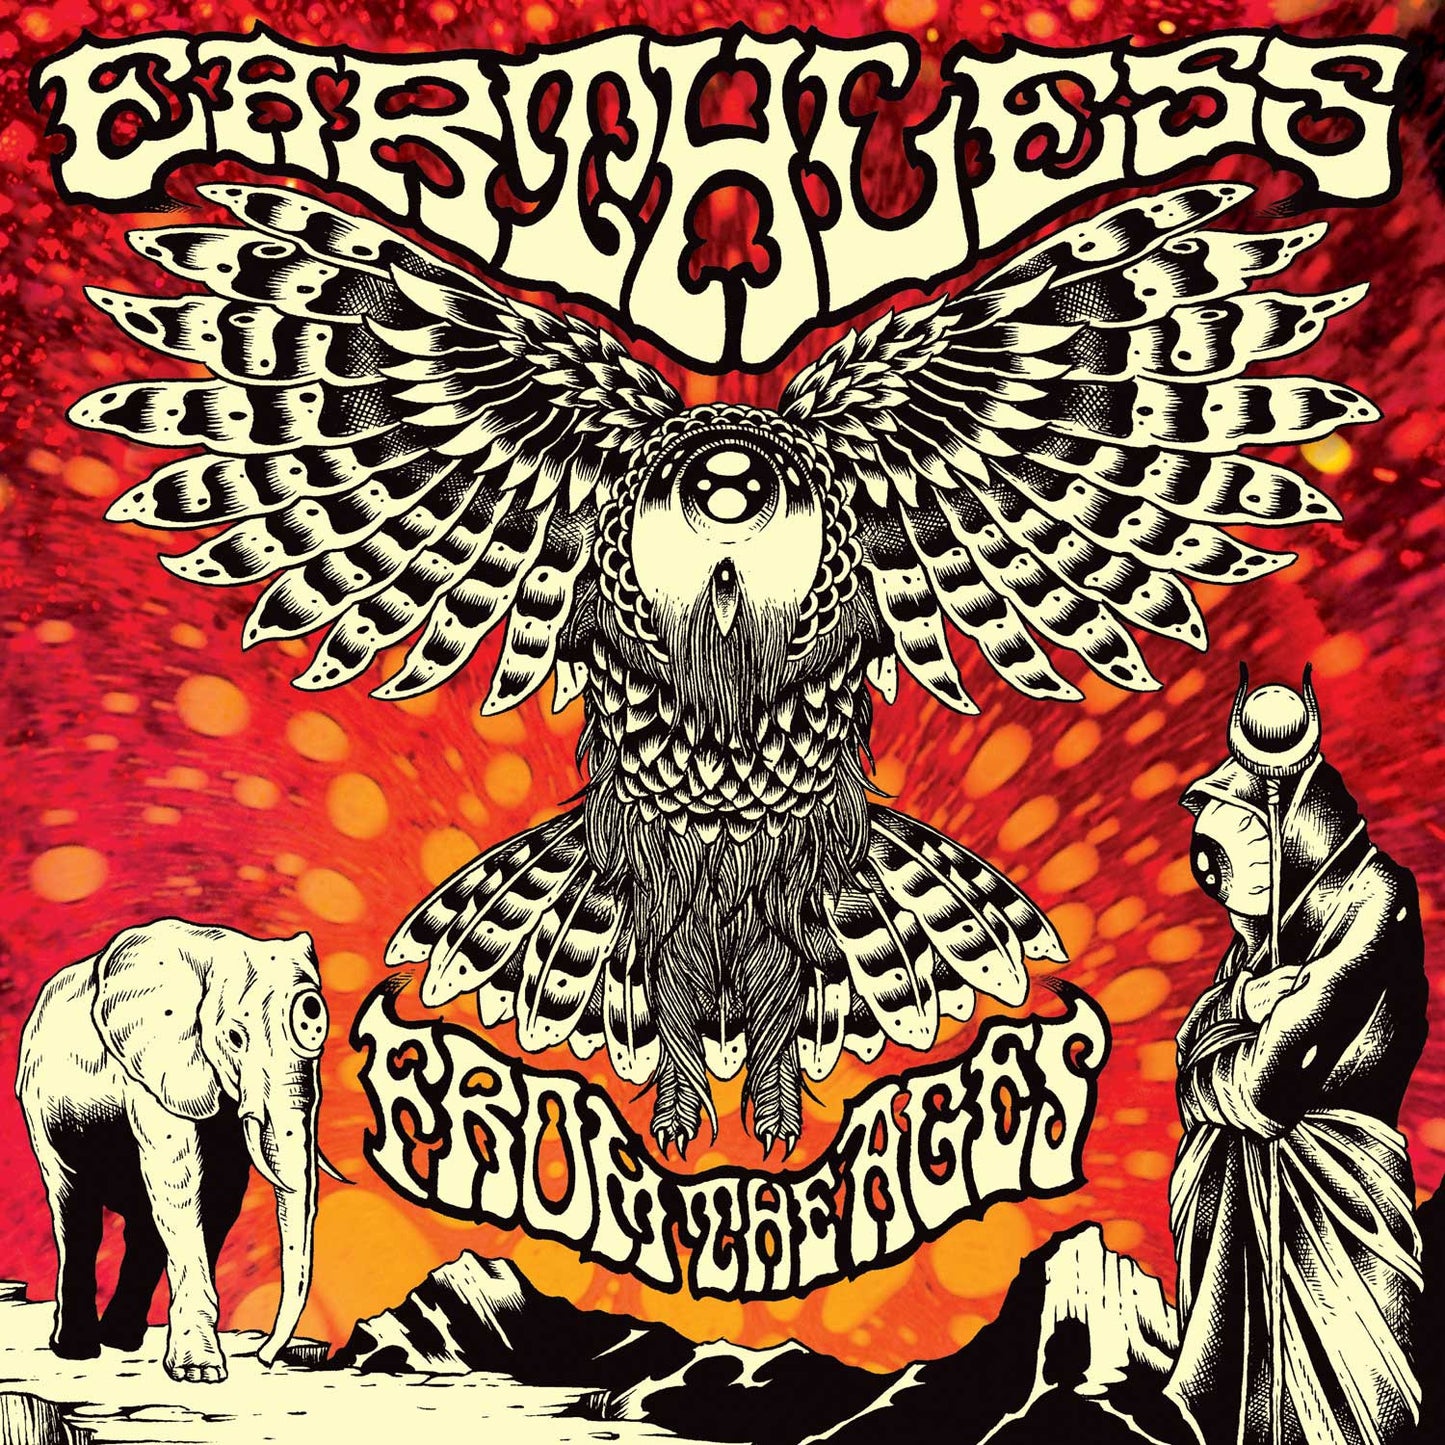 Earthless - From the Ages